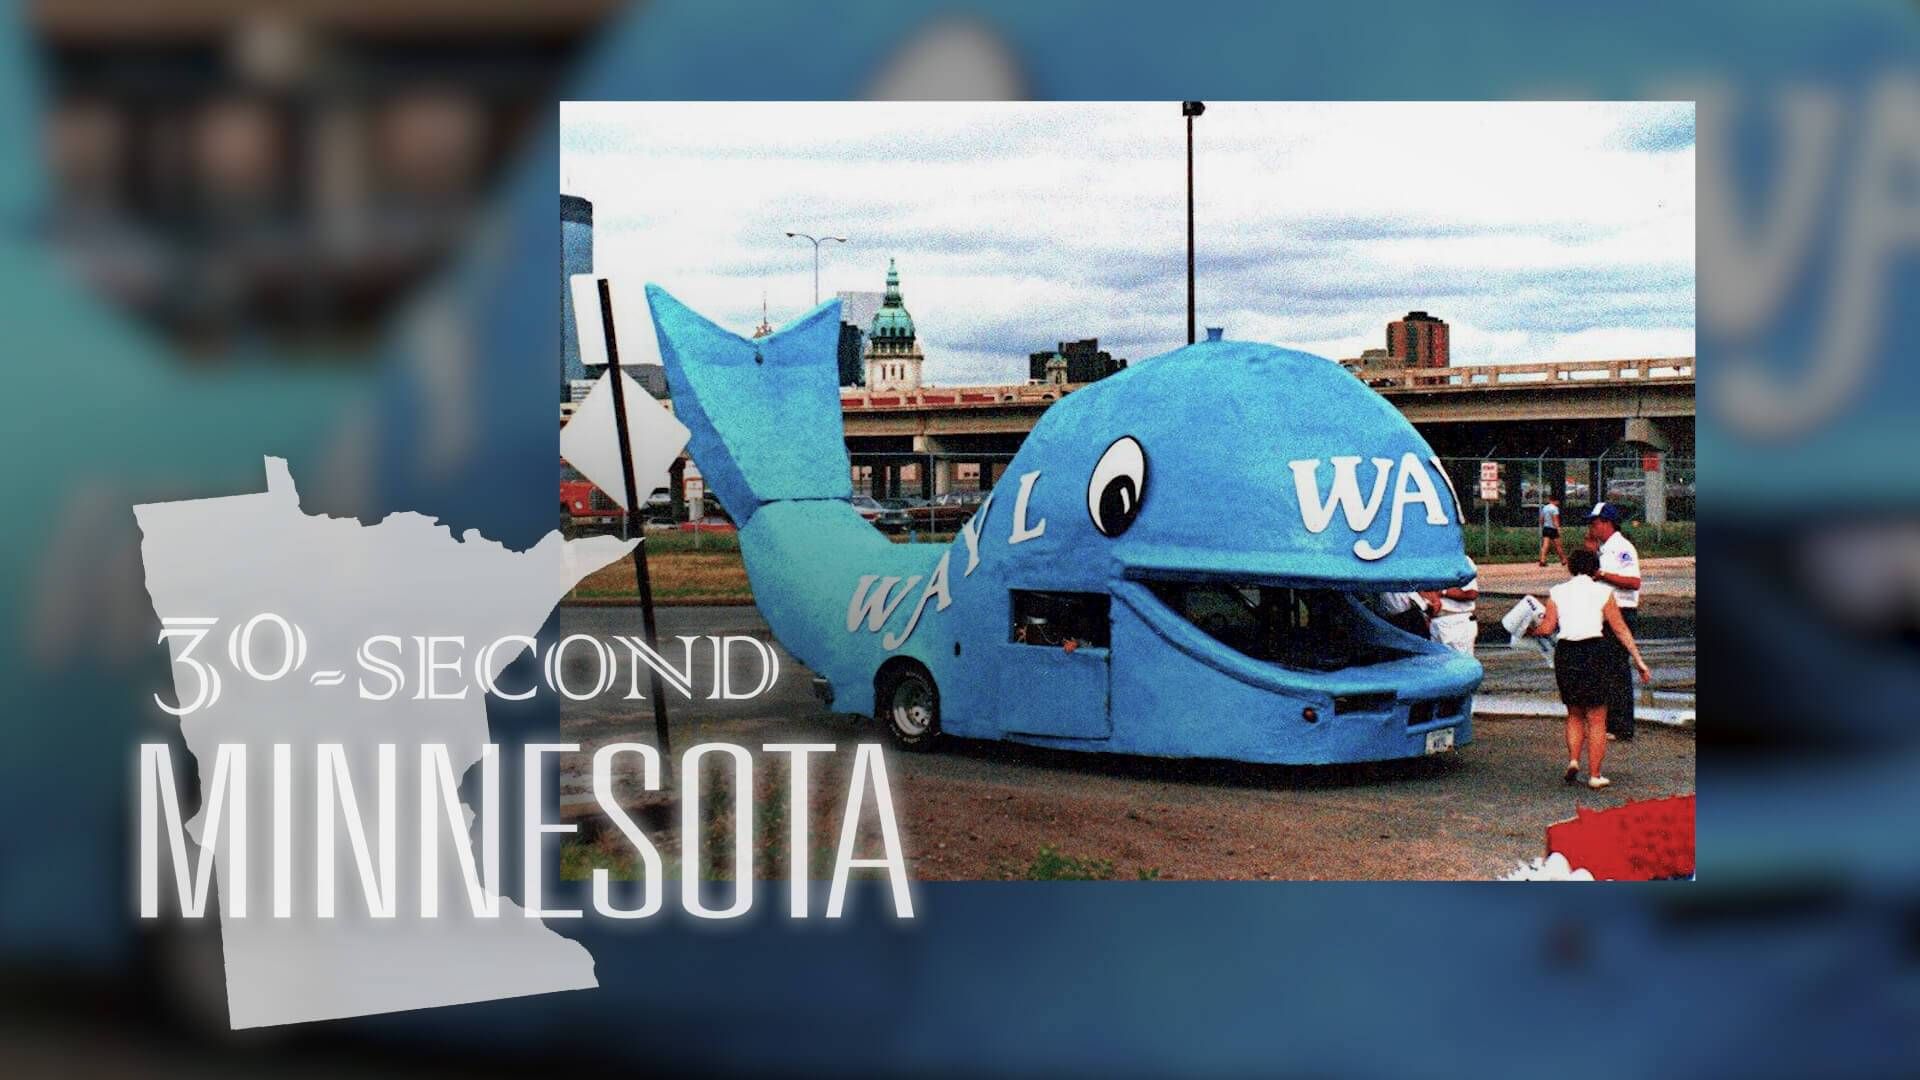 30-Second Minnesota: That Whale Car in South St. Paul